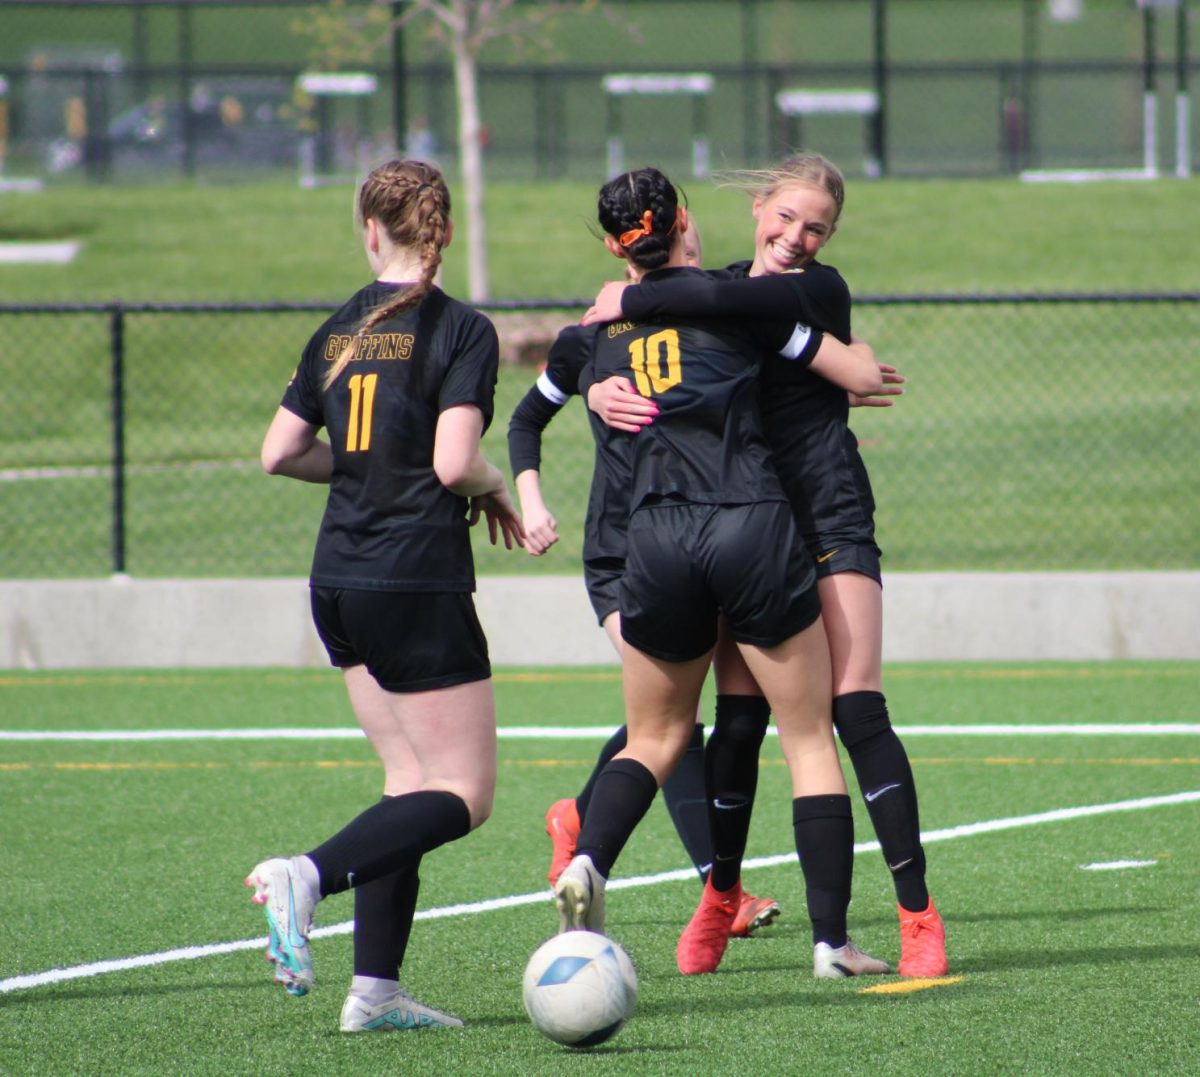 After junior Senora DeFinis successful goal, with assist from junior Kendall Dobberstein, the pair embraces. 